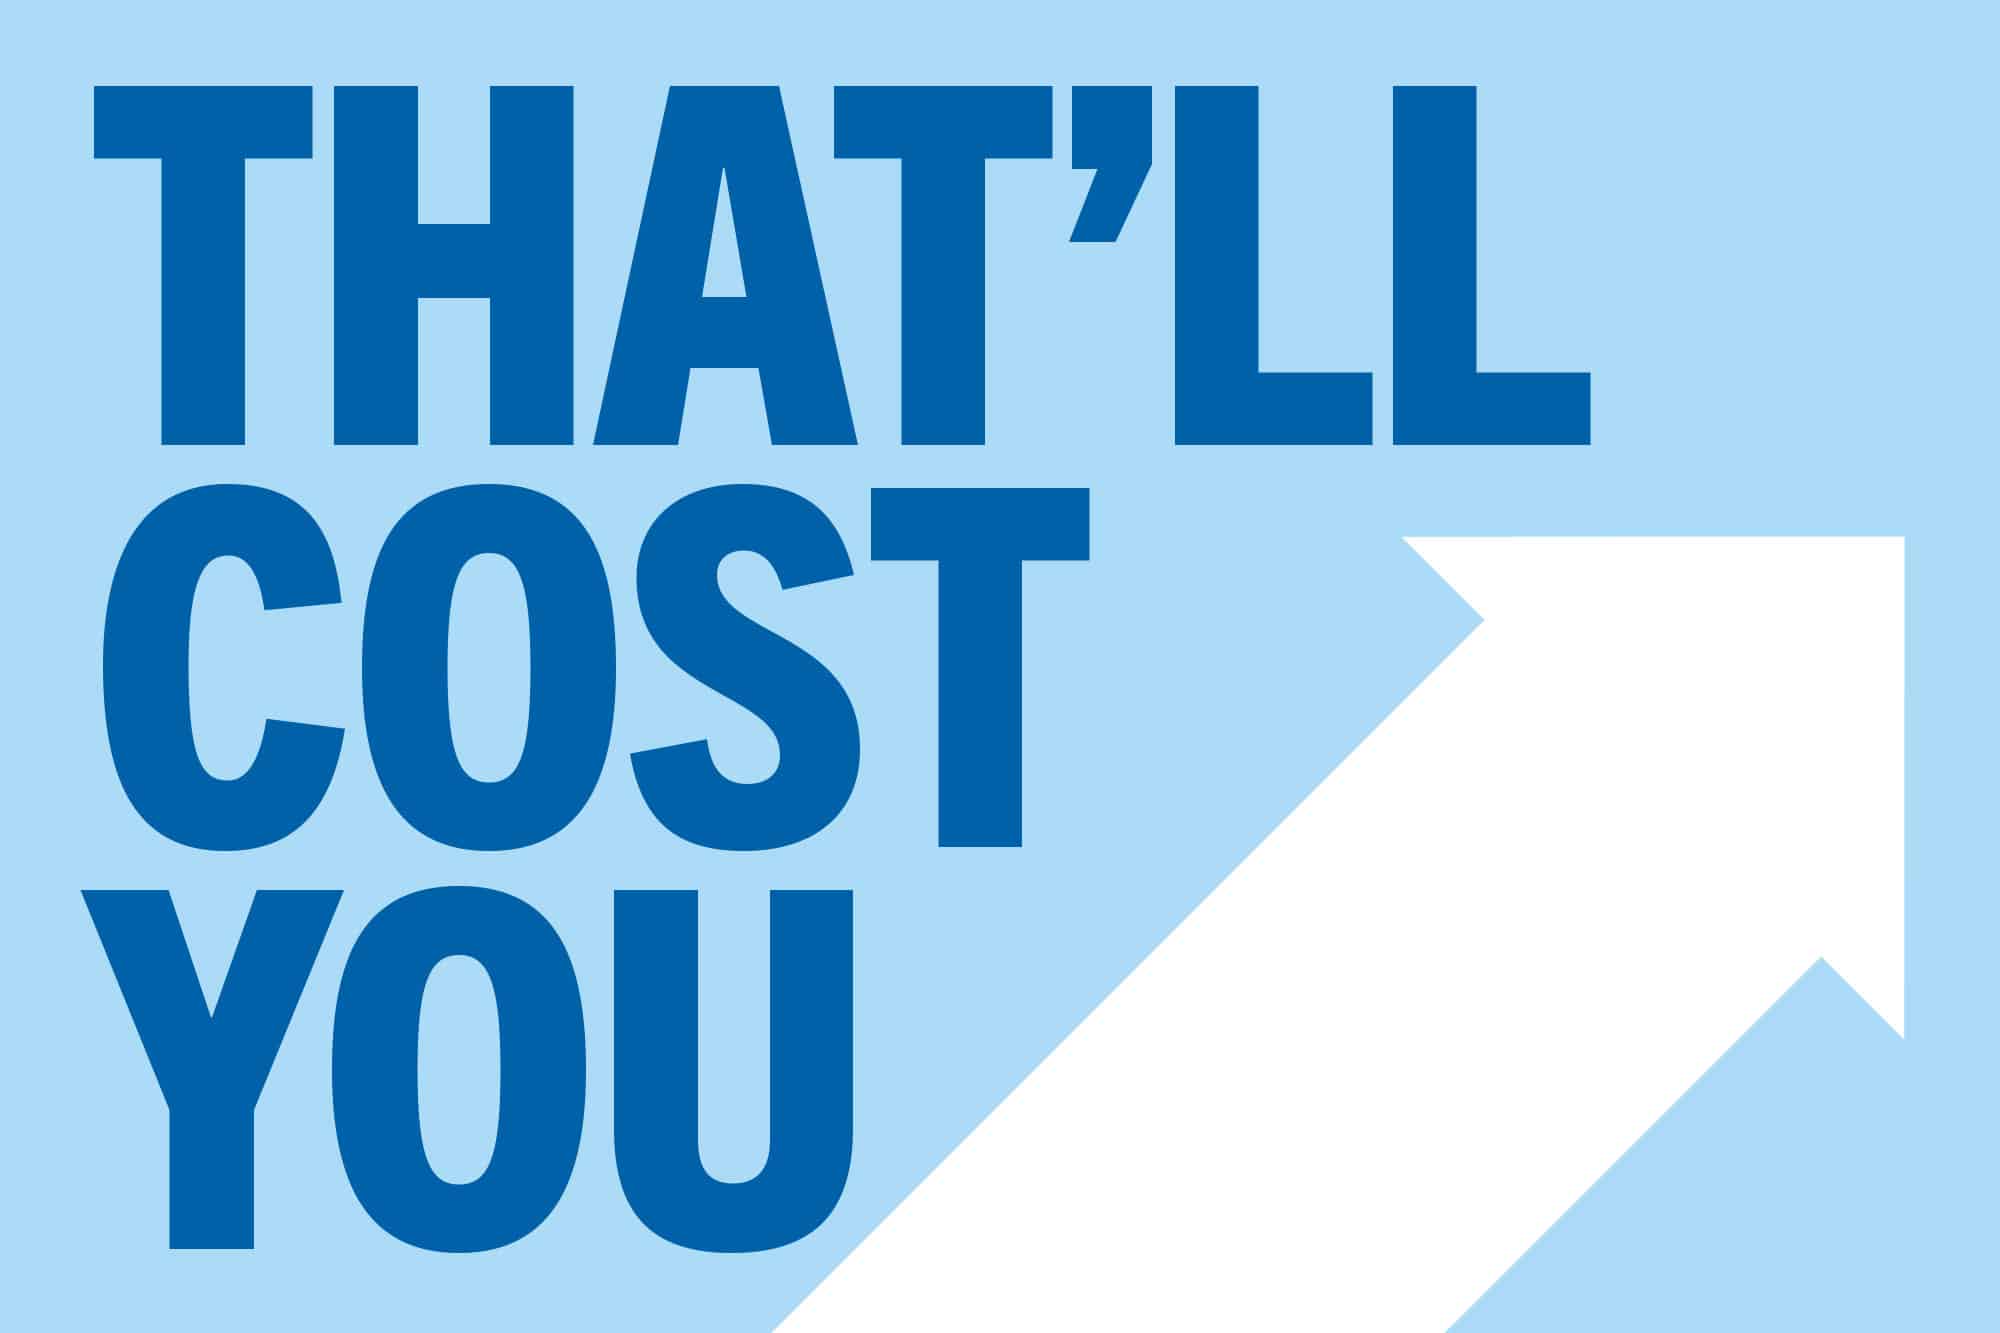 A graphic that reads "That'll cost you" with an errow that points up and right.